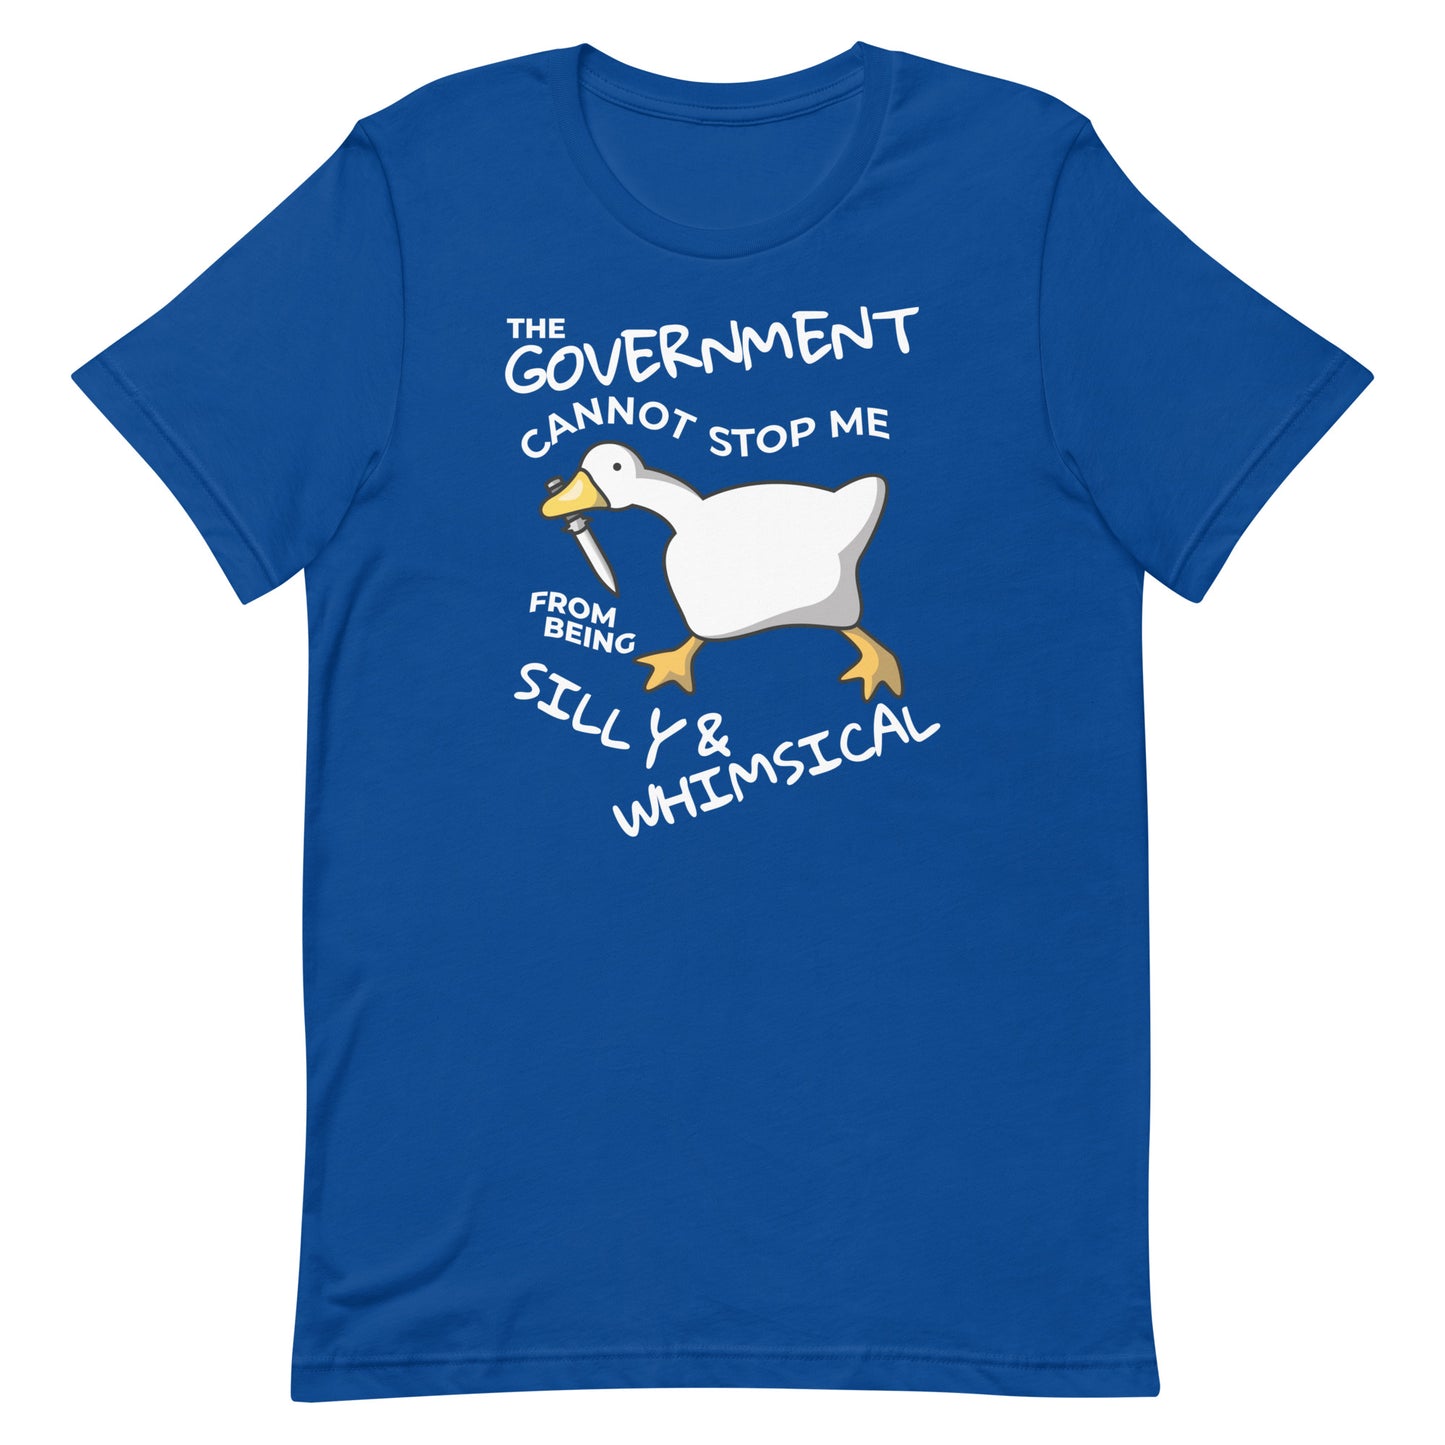 The Government Cannot Stop Me From Being Silly & Whimsical Unisex t-shirt